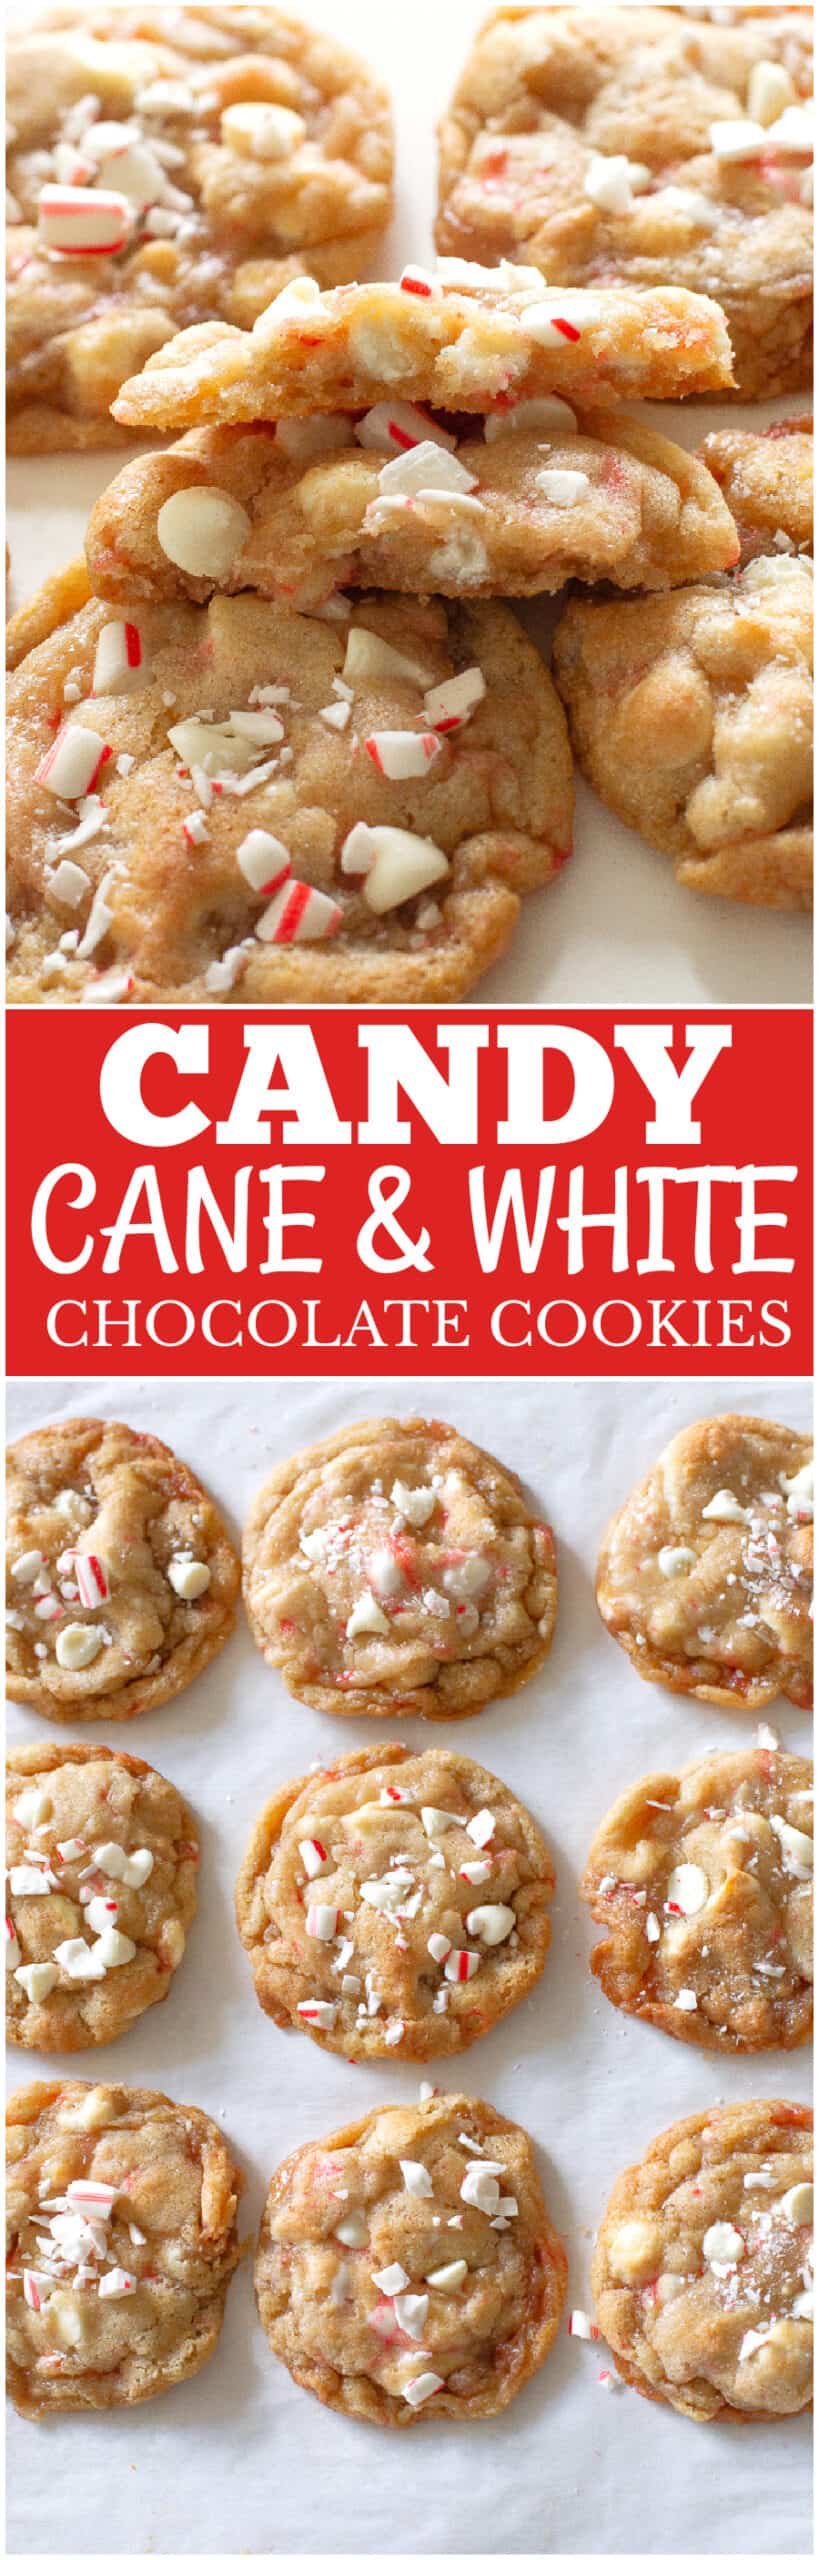 candy cane white chocolate cookies scaled - White Chocolate Candy Cane Cookies